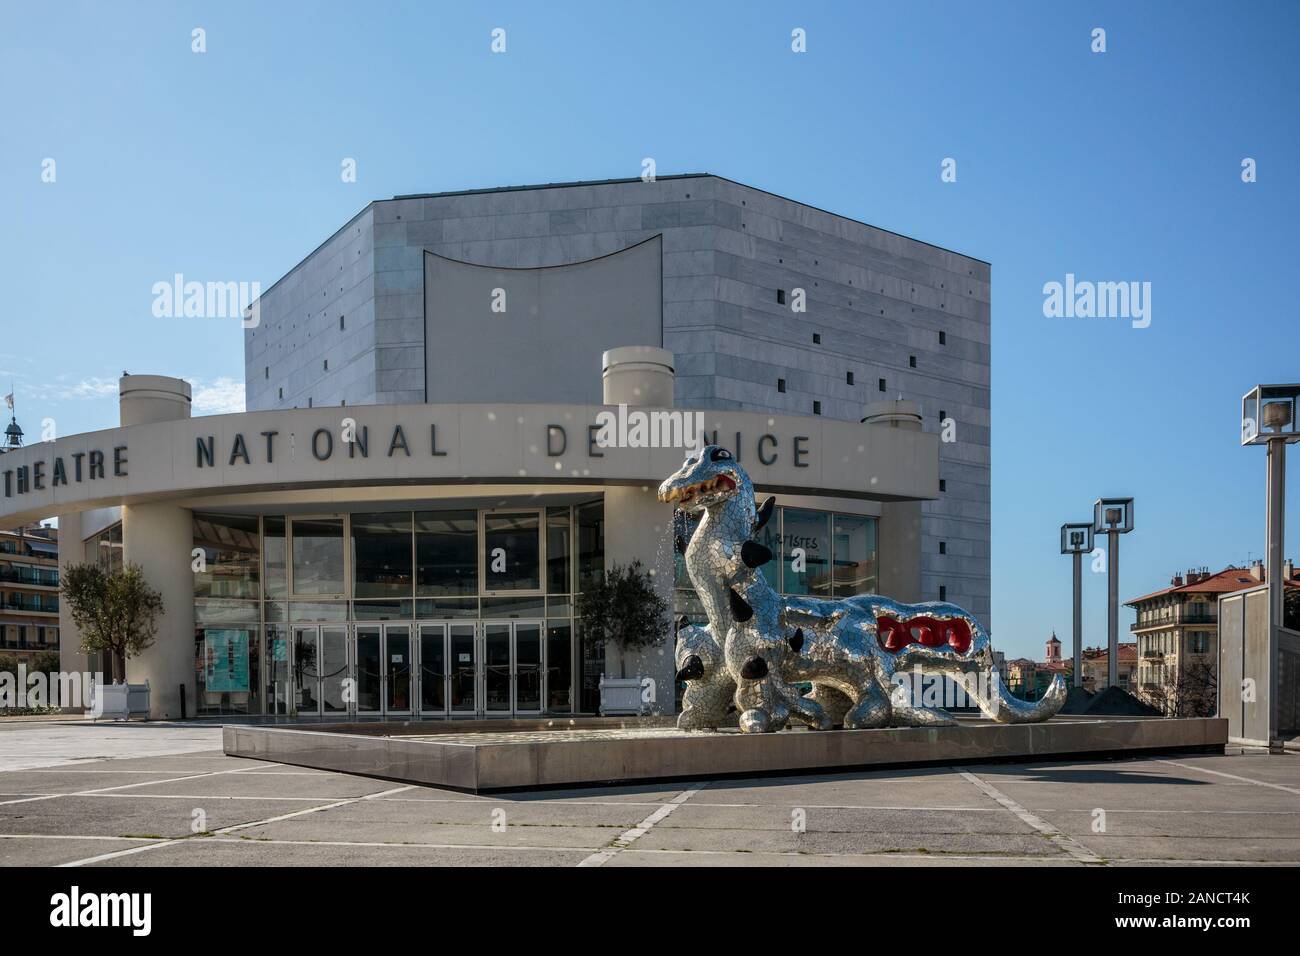 National Theatre, Theatre National de Nice, Nice, French Riviera, Cote d'Azur, France. Stock Photo